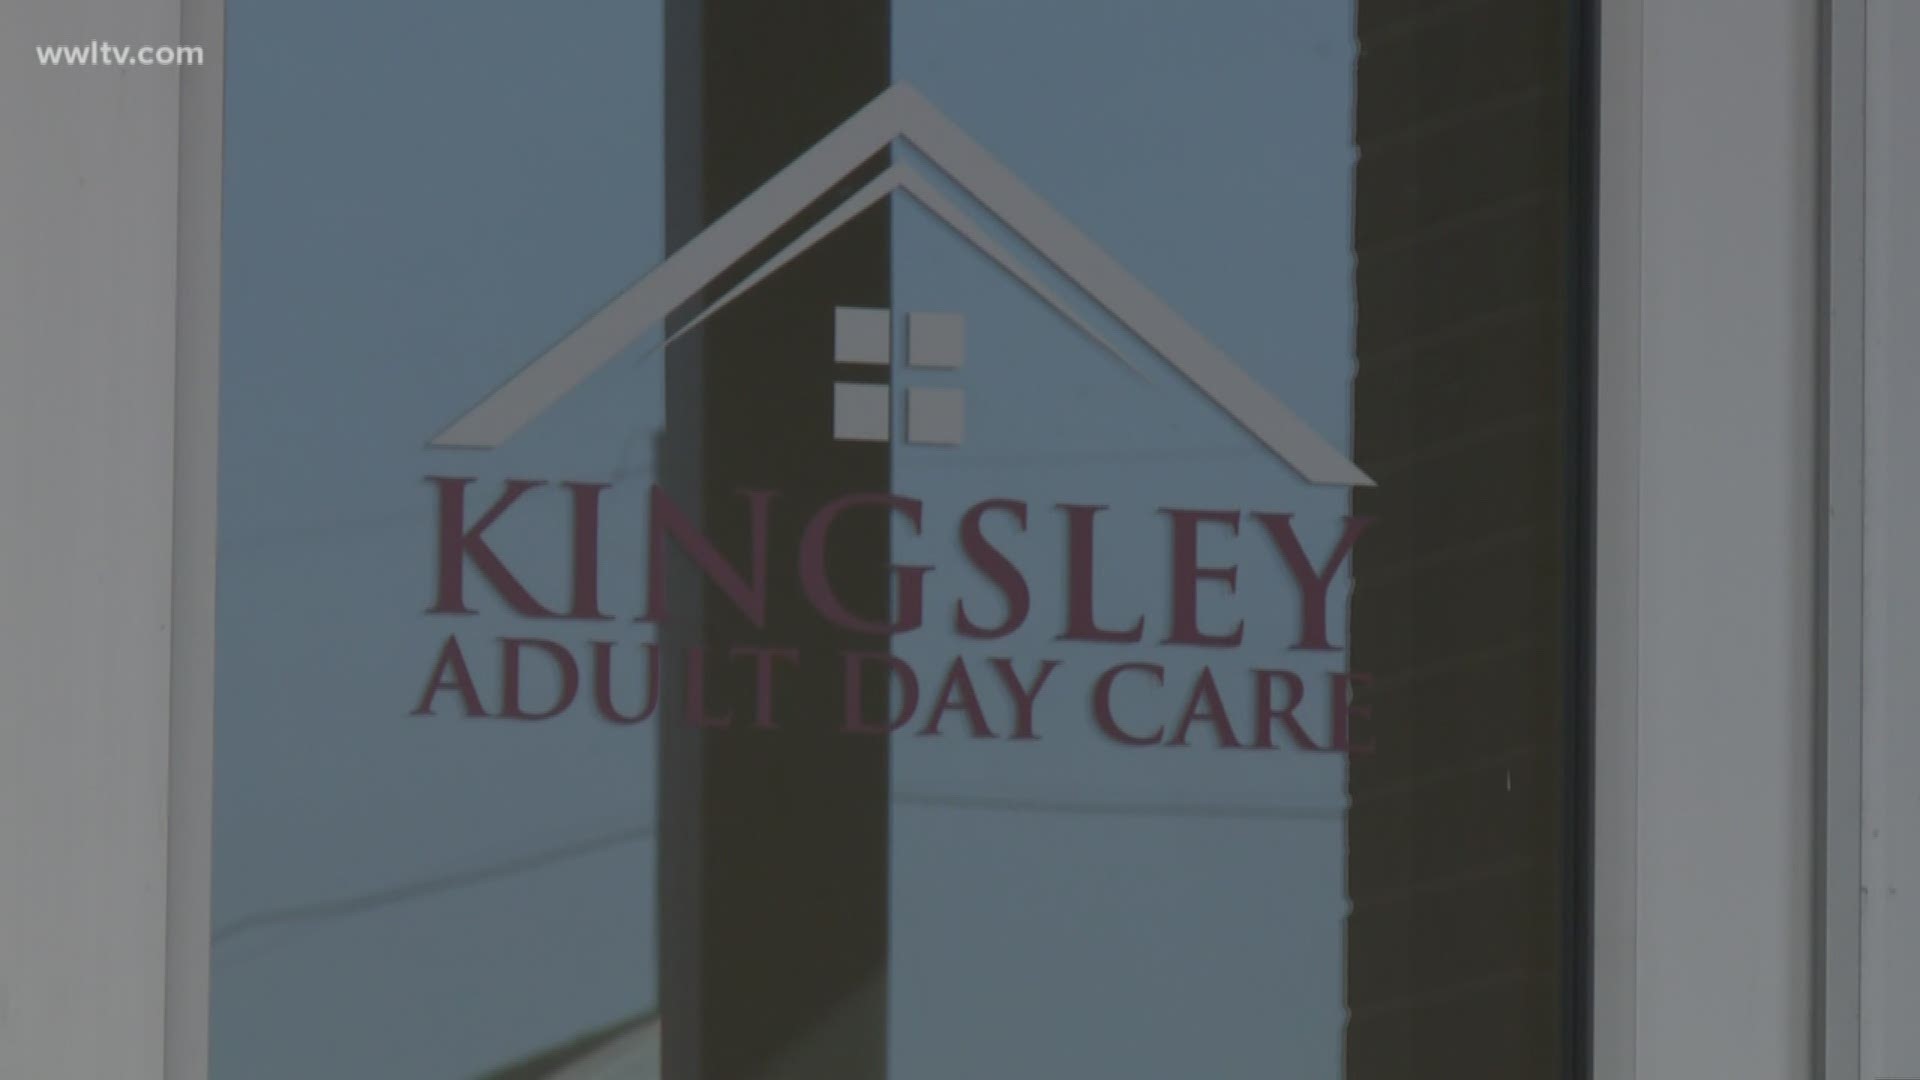 Kingsley House says you should make a schedule ahead of the holidays that reflects the stamina of elderly or ill relatives.